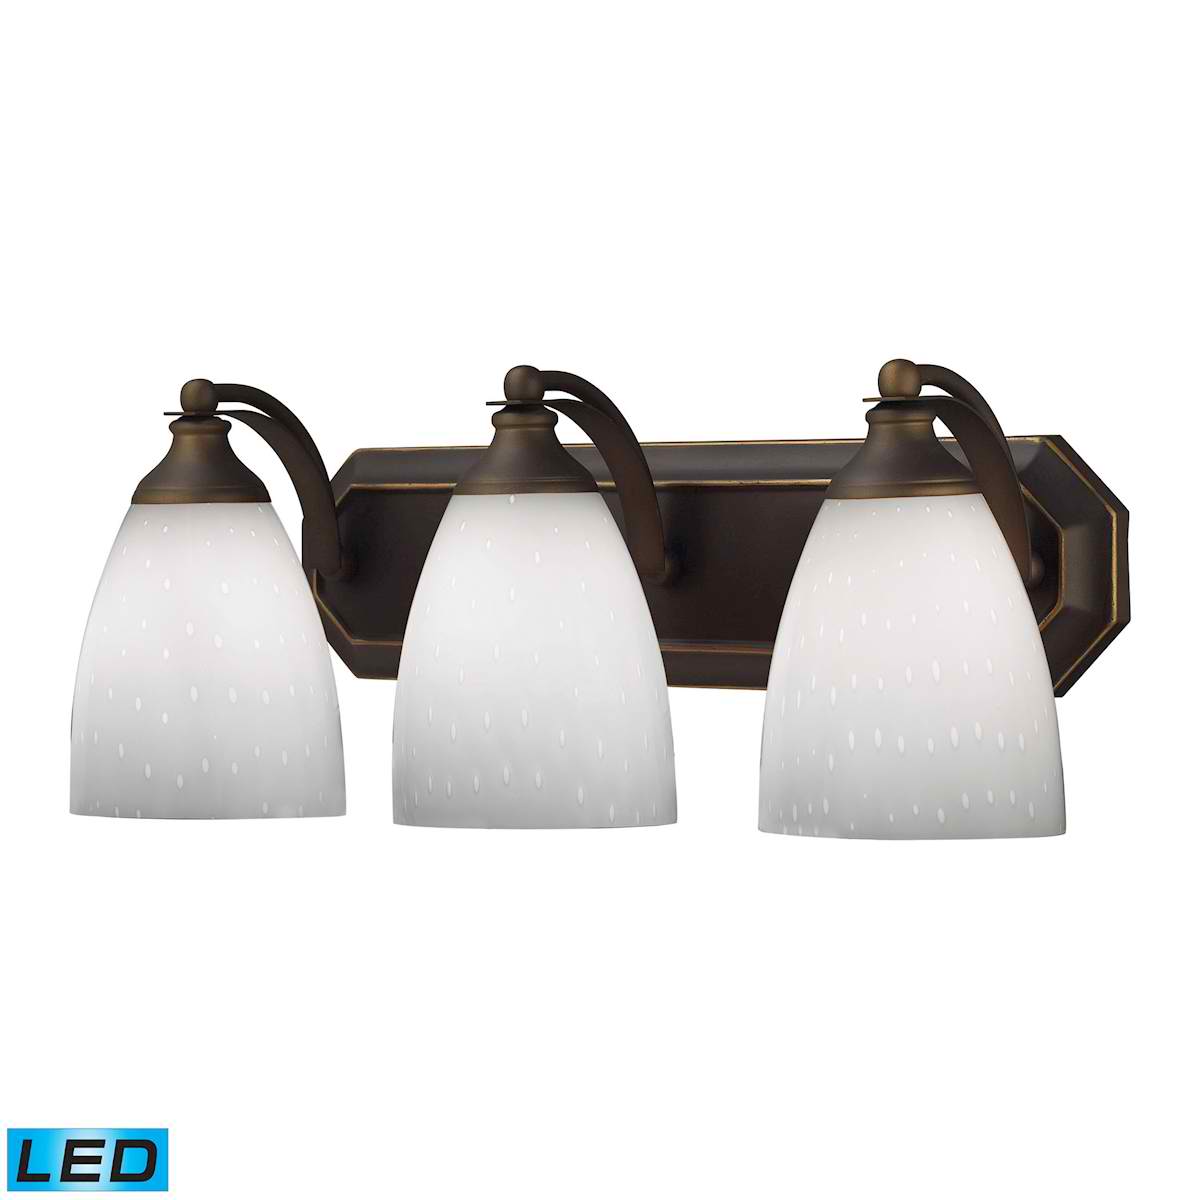 3 Light Vanity in Aged Bronze and Simply White Glass - LED, 800 Lumens (2400 Lumens Total) with Full Scale